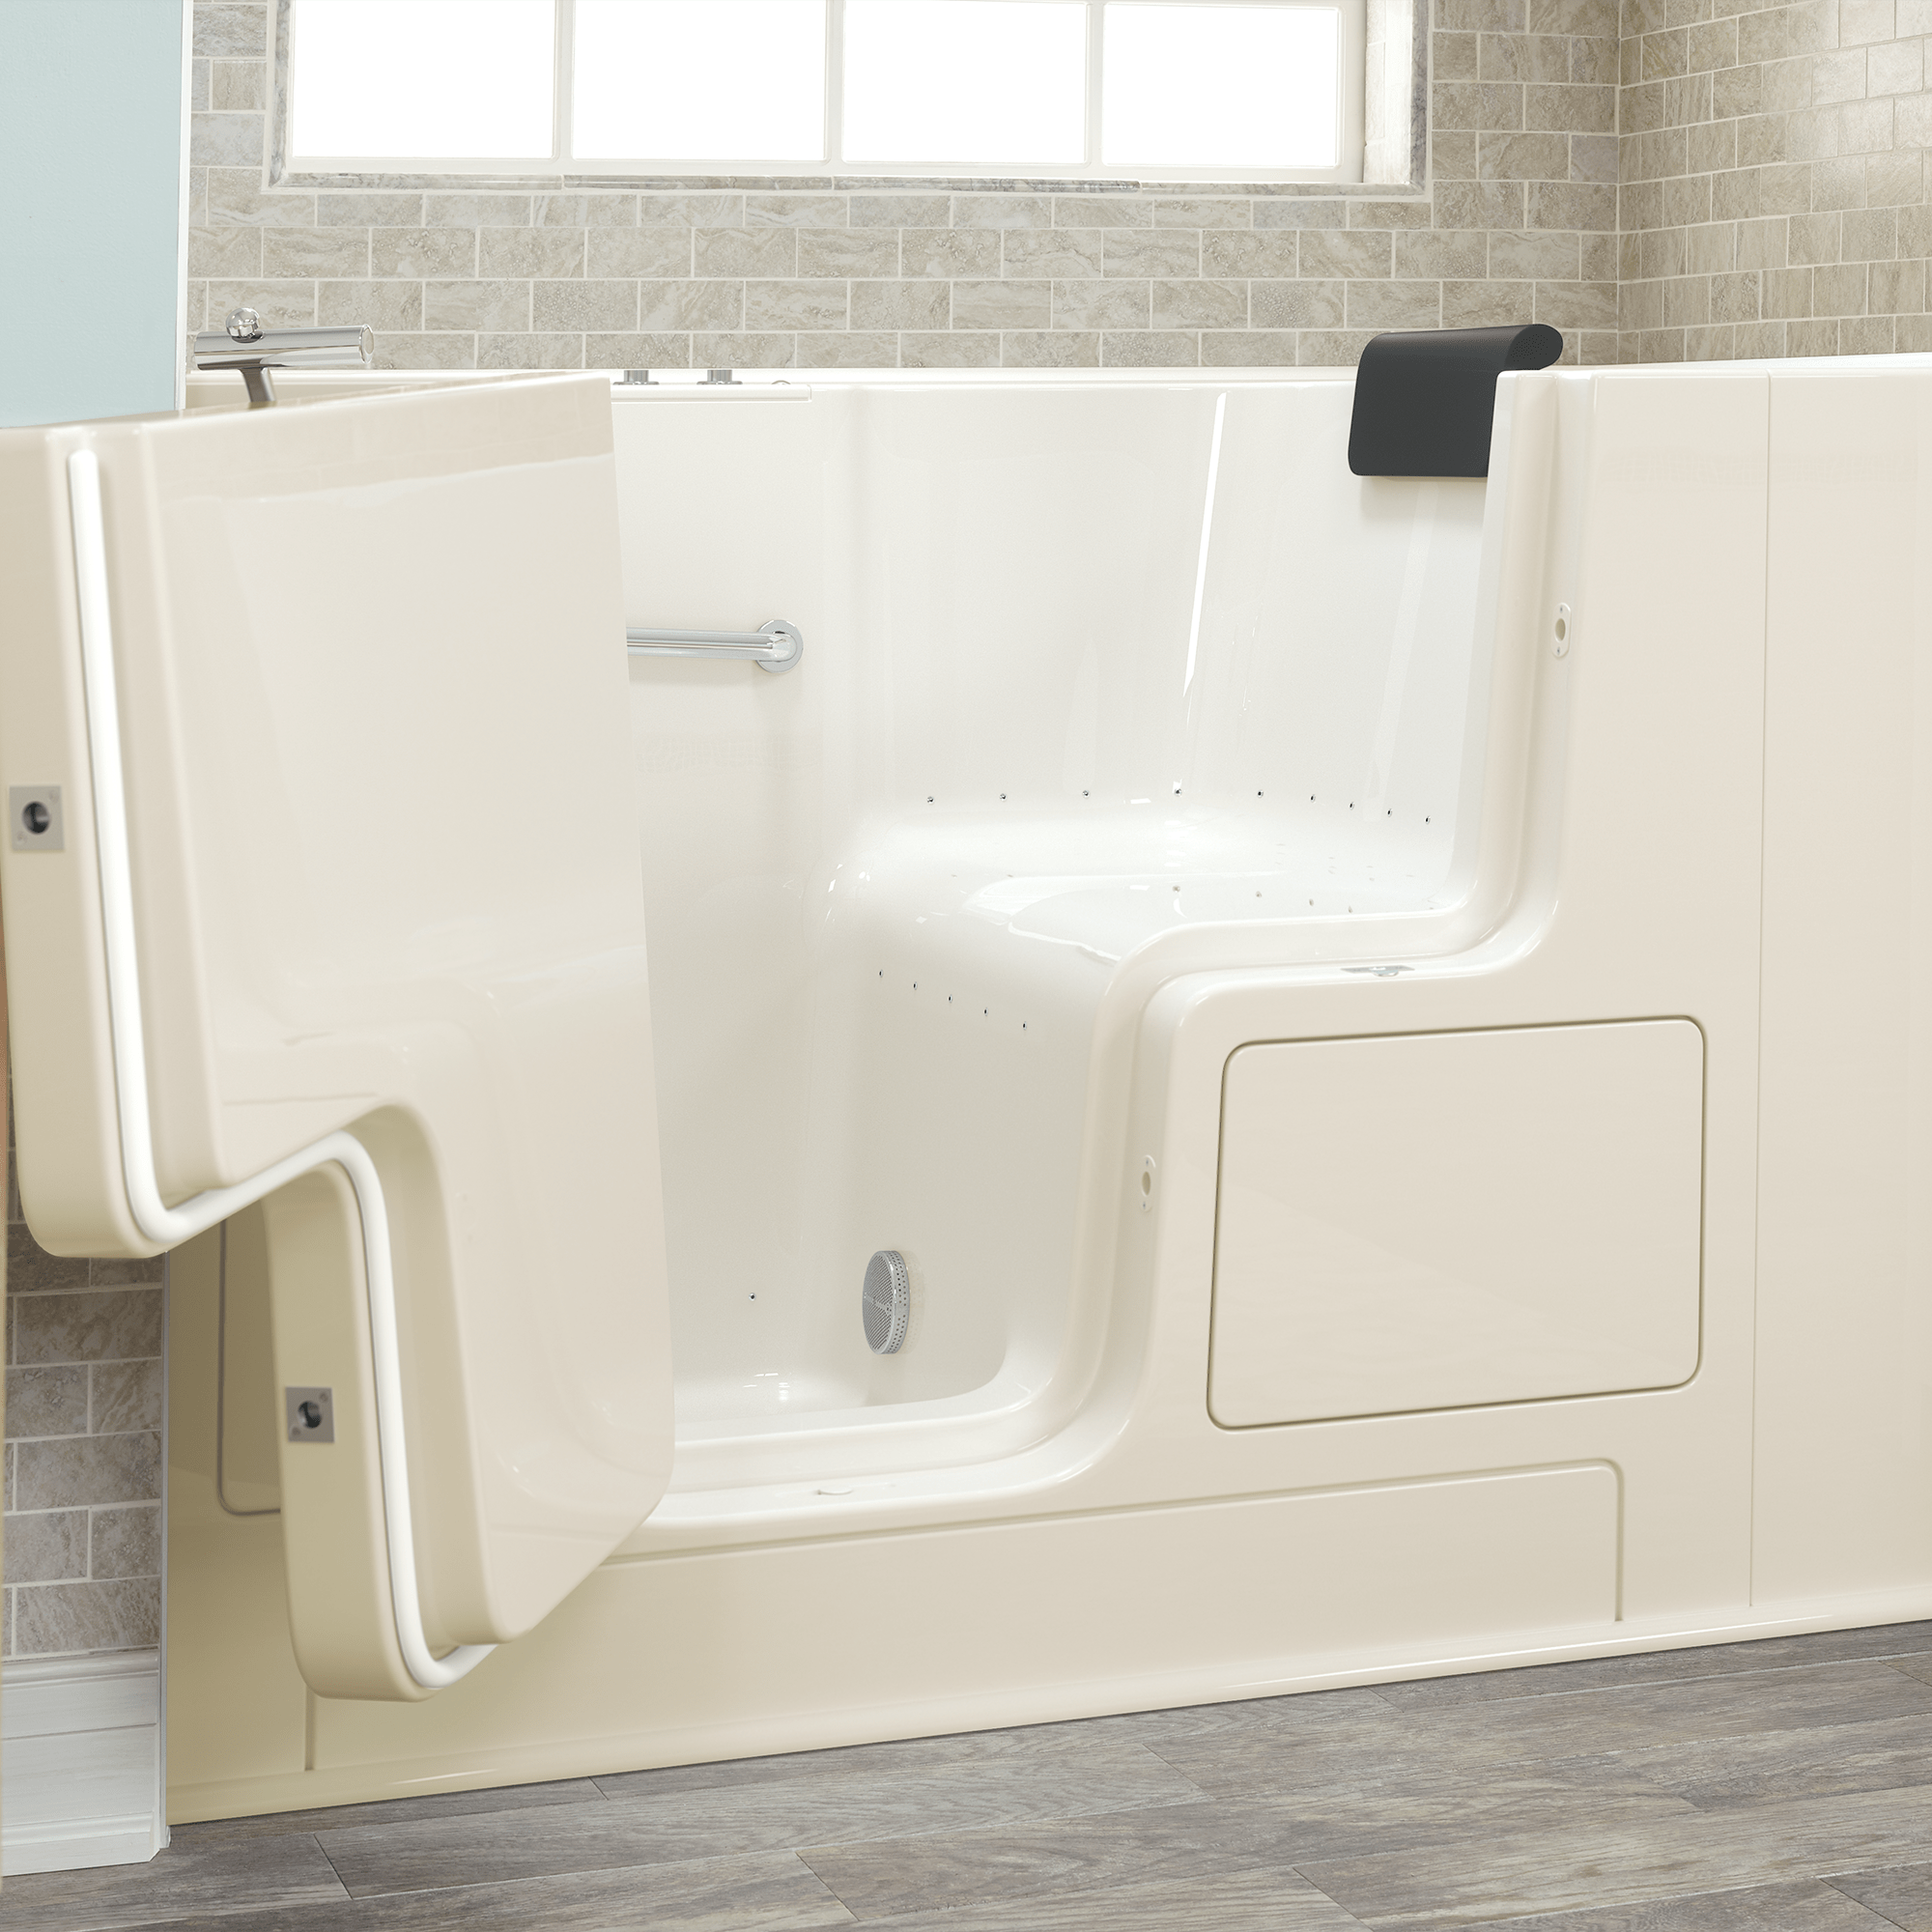 Gelcoat Premium Series 32 x 52 -Inch Walk-in Tub With Air Spa System - Left-Hand Drain